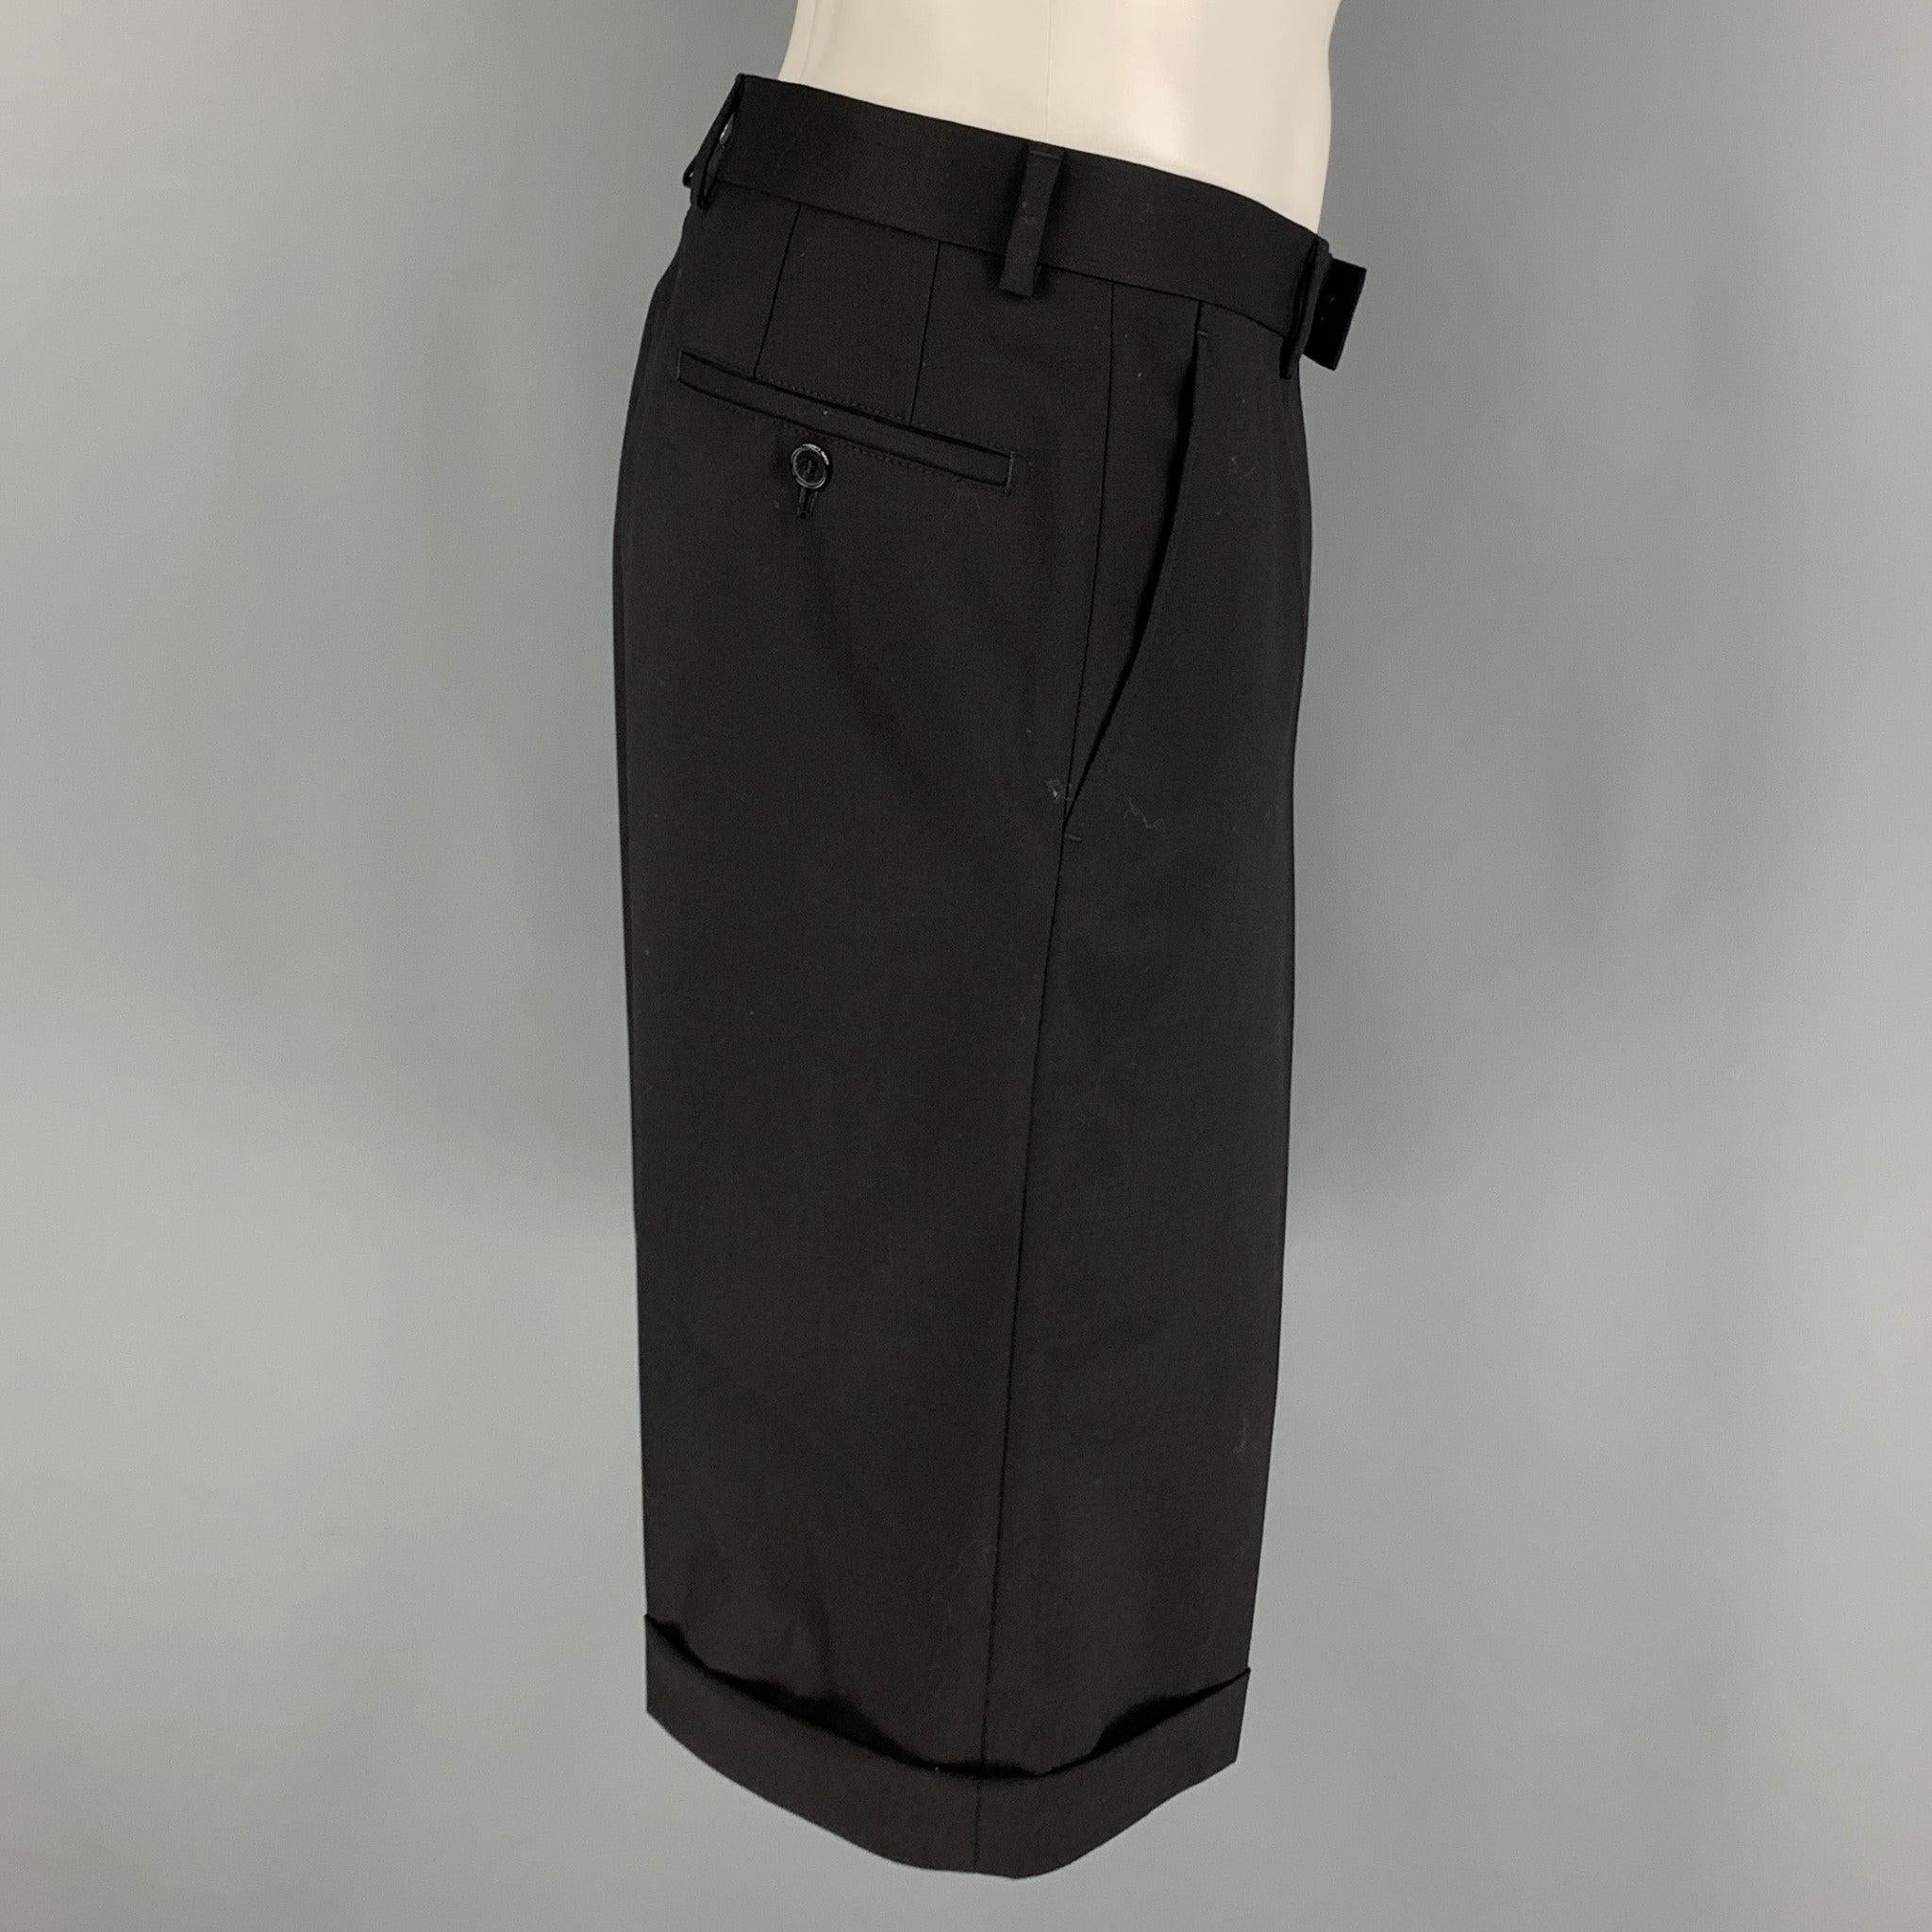 KARL LAGERFELD shorts come in a black wool and elastane twill material with a flat front, folded cuffs, and zipper fly.Excellent Pre-Owned Condition.  

Marked:   52 

Measurements: 
  Waist: 35 inches Rise: 8.5 inches Inseam: 13 inches 
 
  
  
